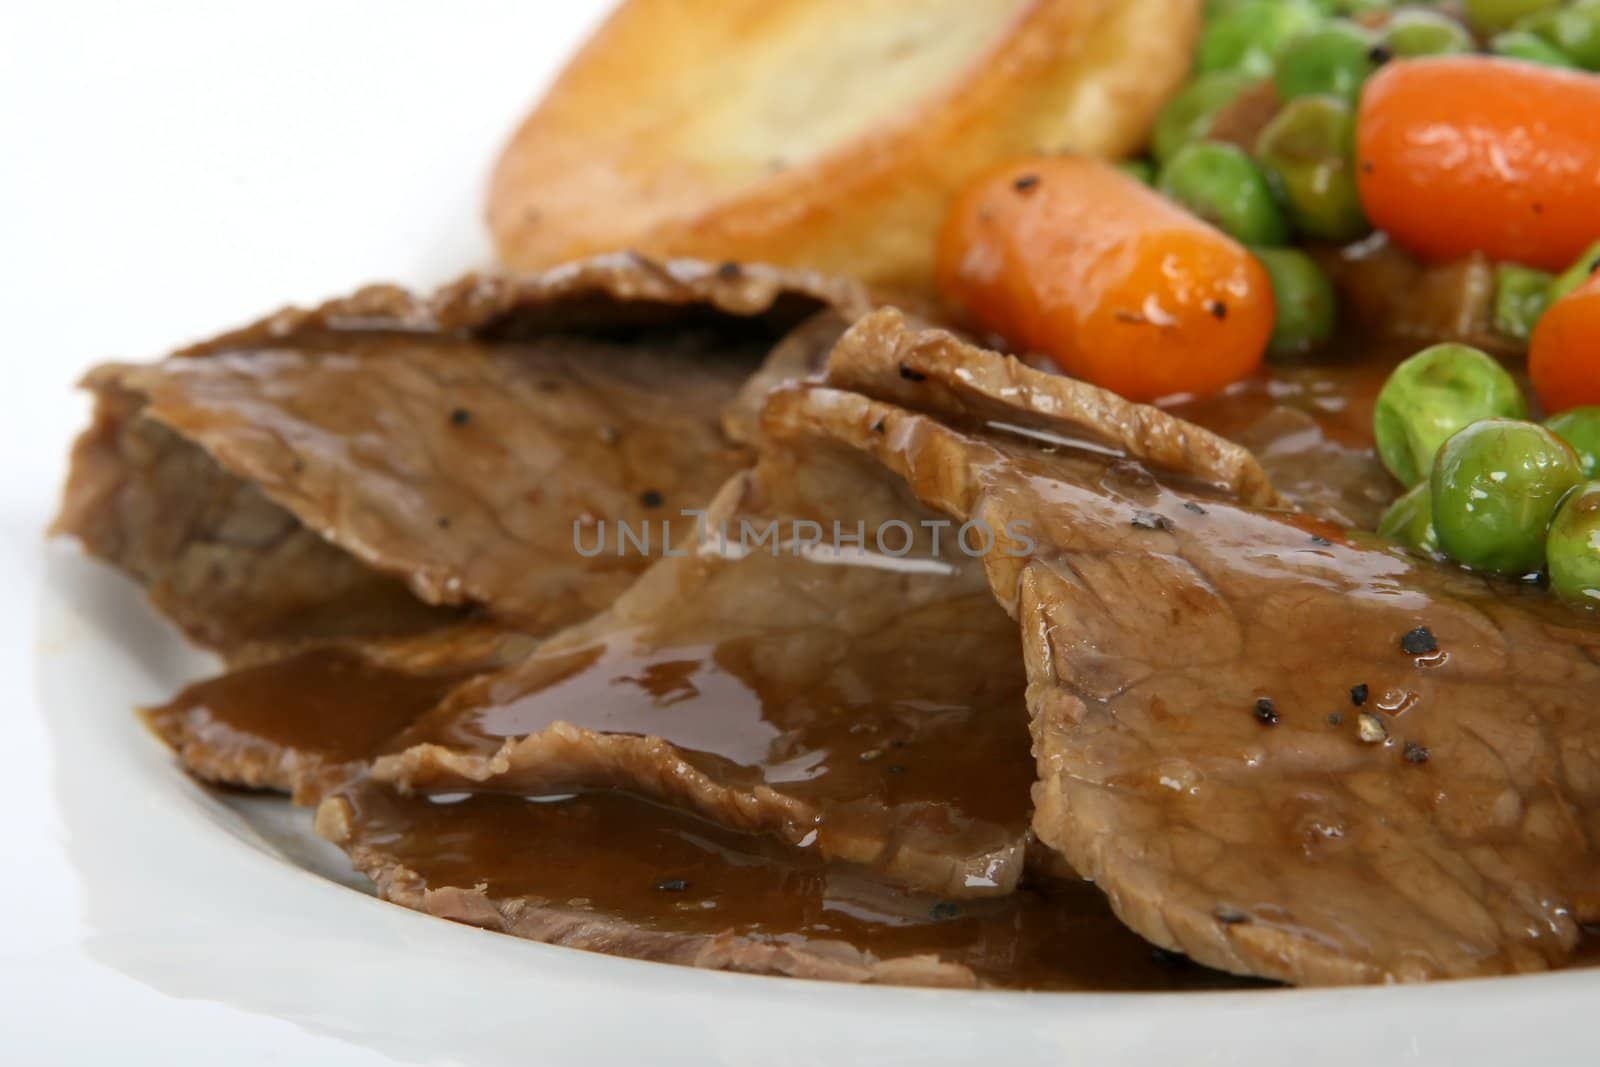 Traditional English roast by tornellistefano